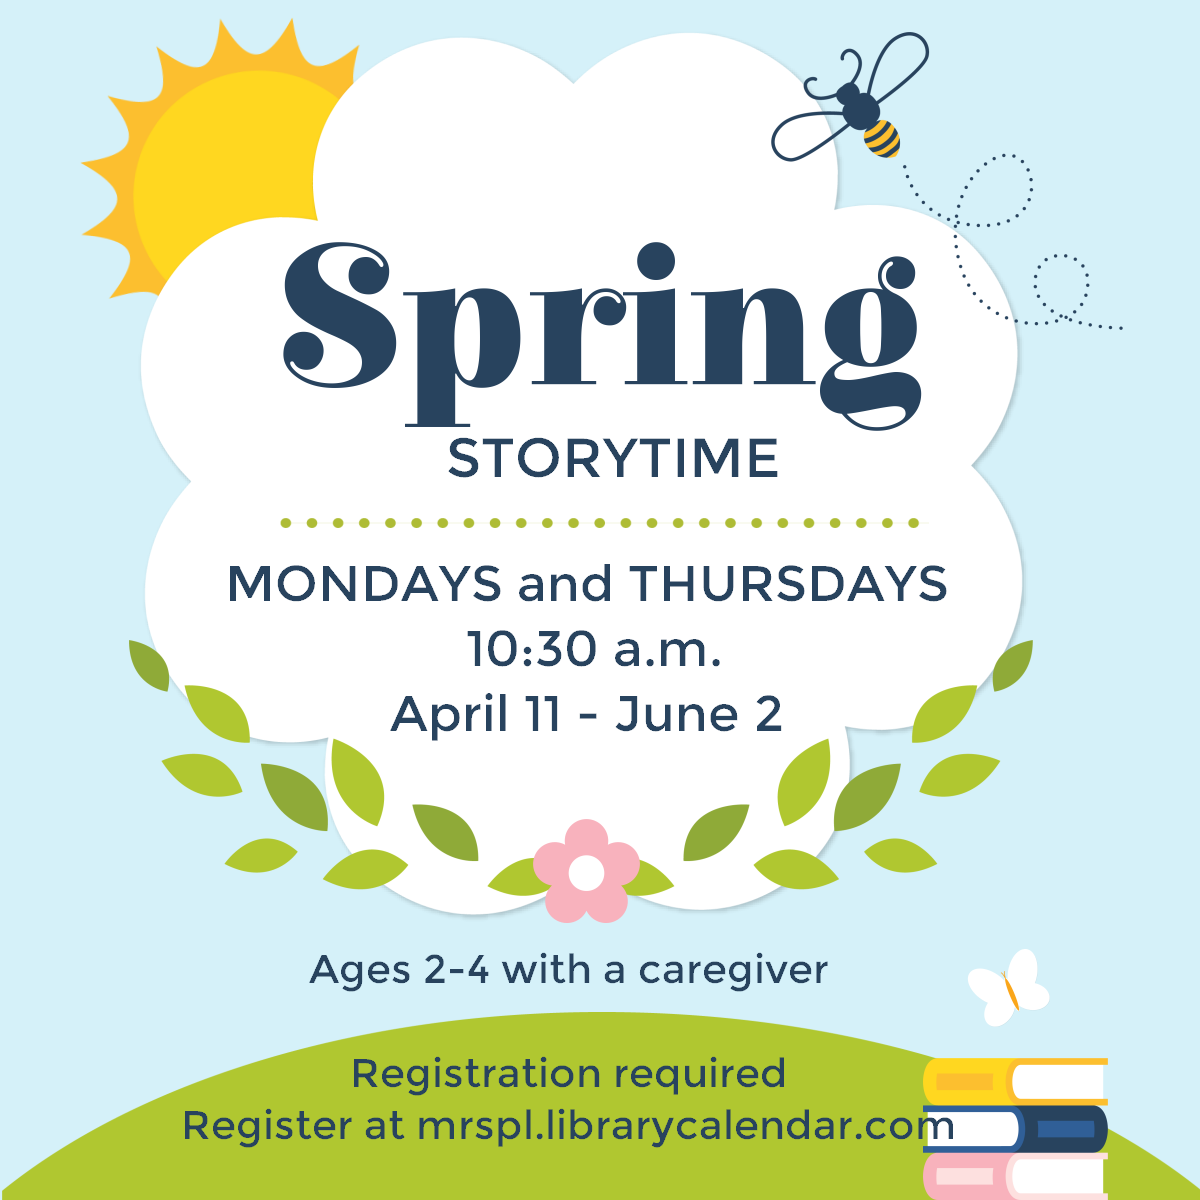 Spring Storytime Mondays and Tuesdays at 10:30am April 11 - June 2